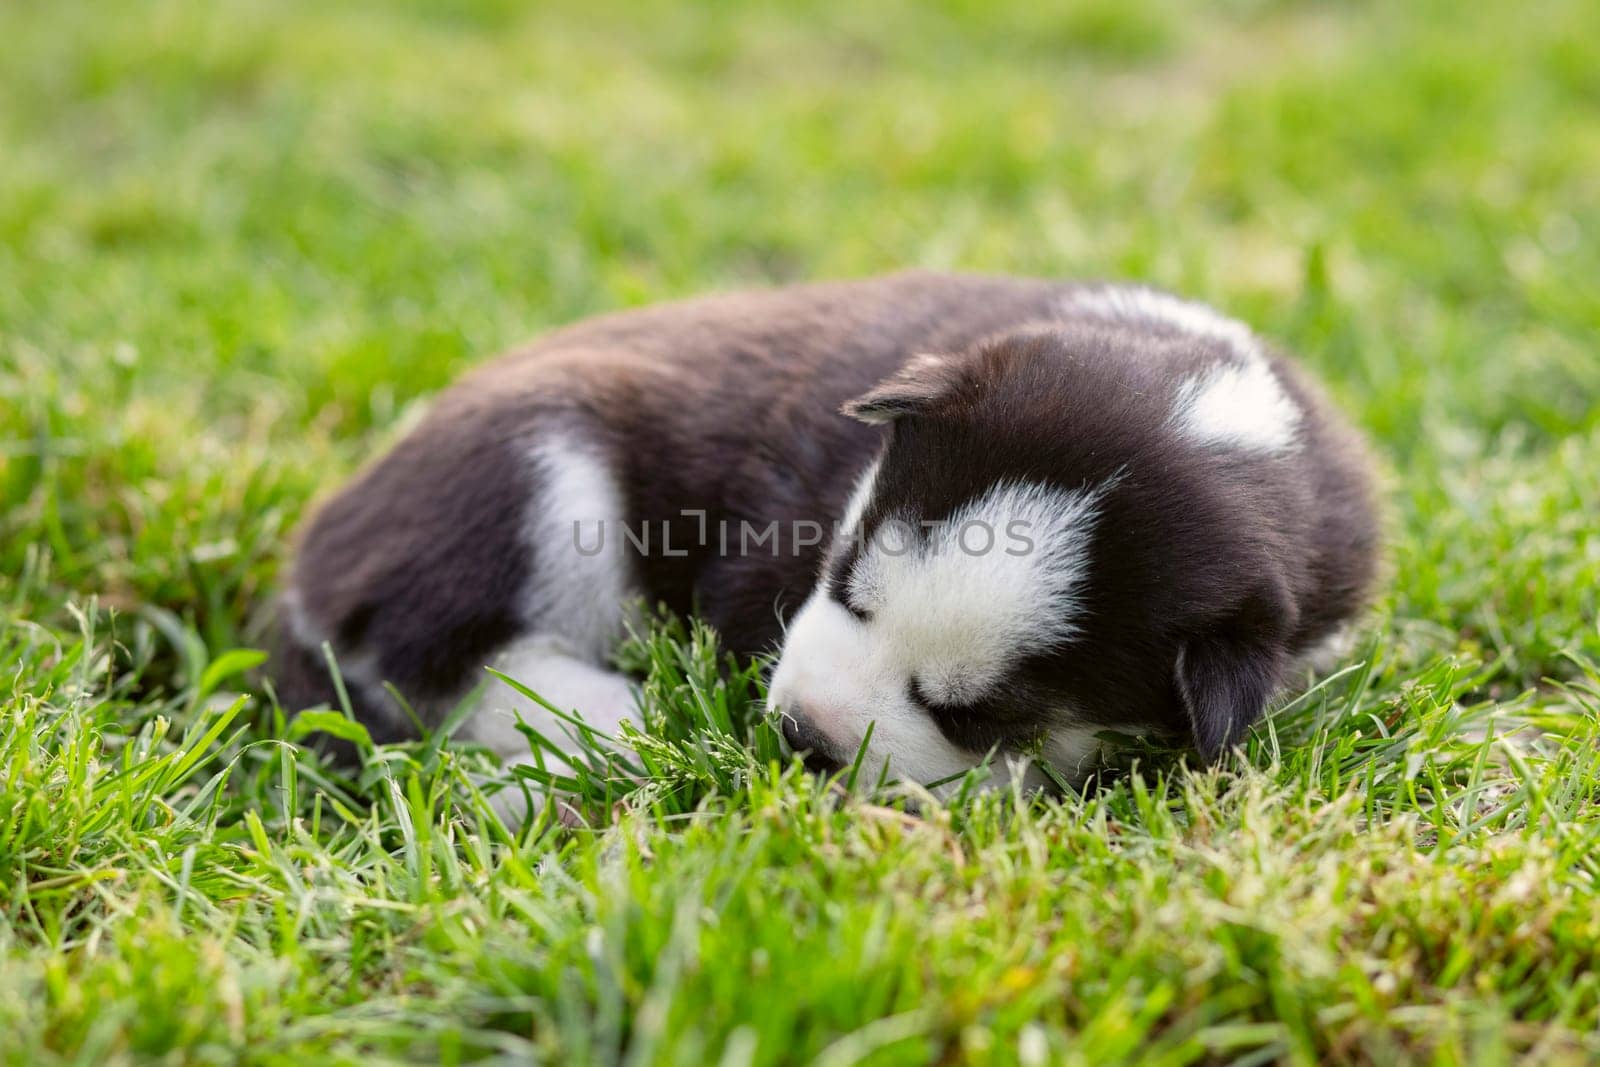 Siberian Husky puppy sleeping on green grass. Outdoor pet portrait. Peaceful animals and relaxation concept. Design for poster, banner